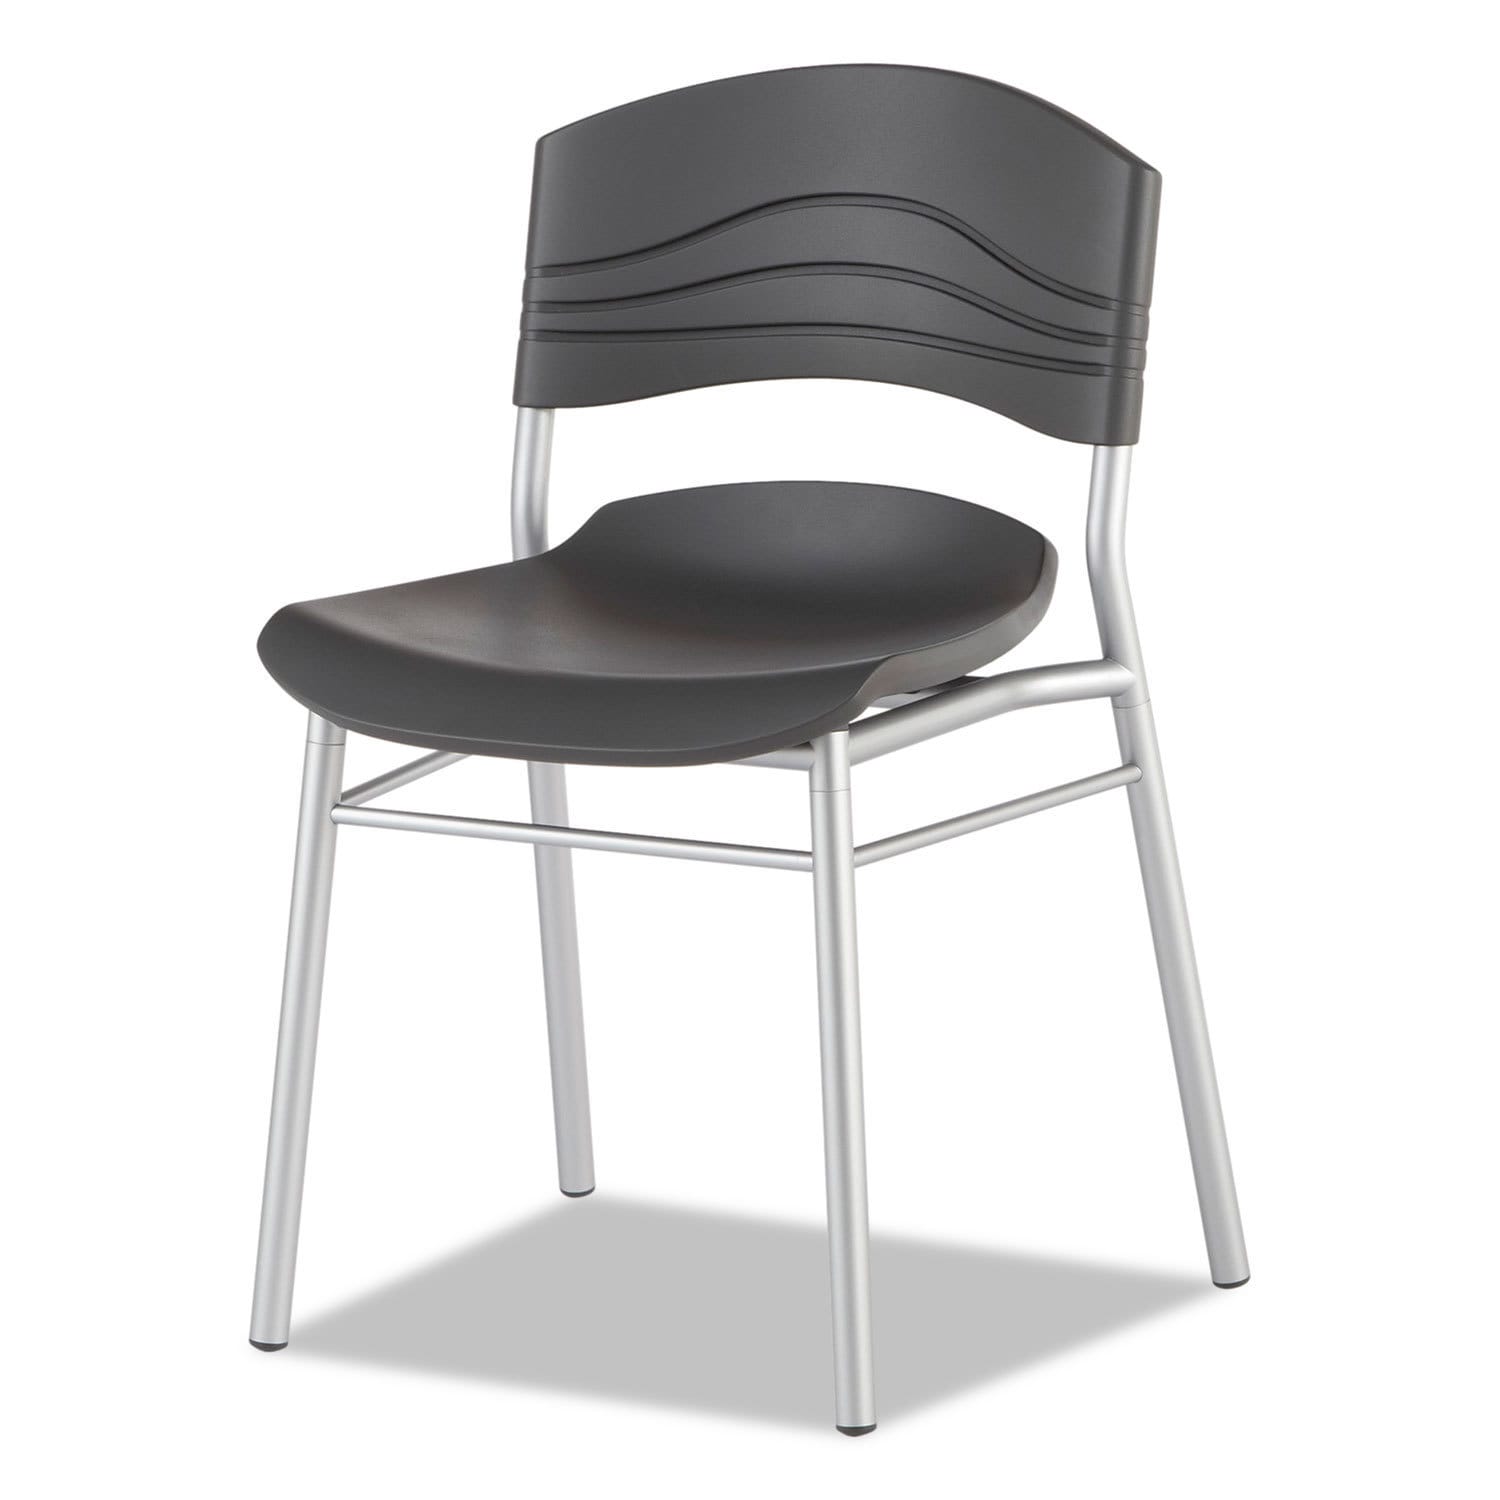 Iceberg CafeWorks Graphite/Silver Chair (Set of 2)